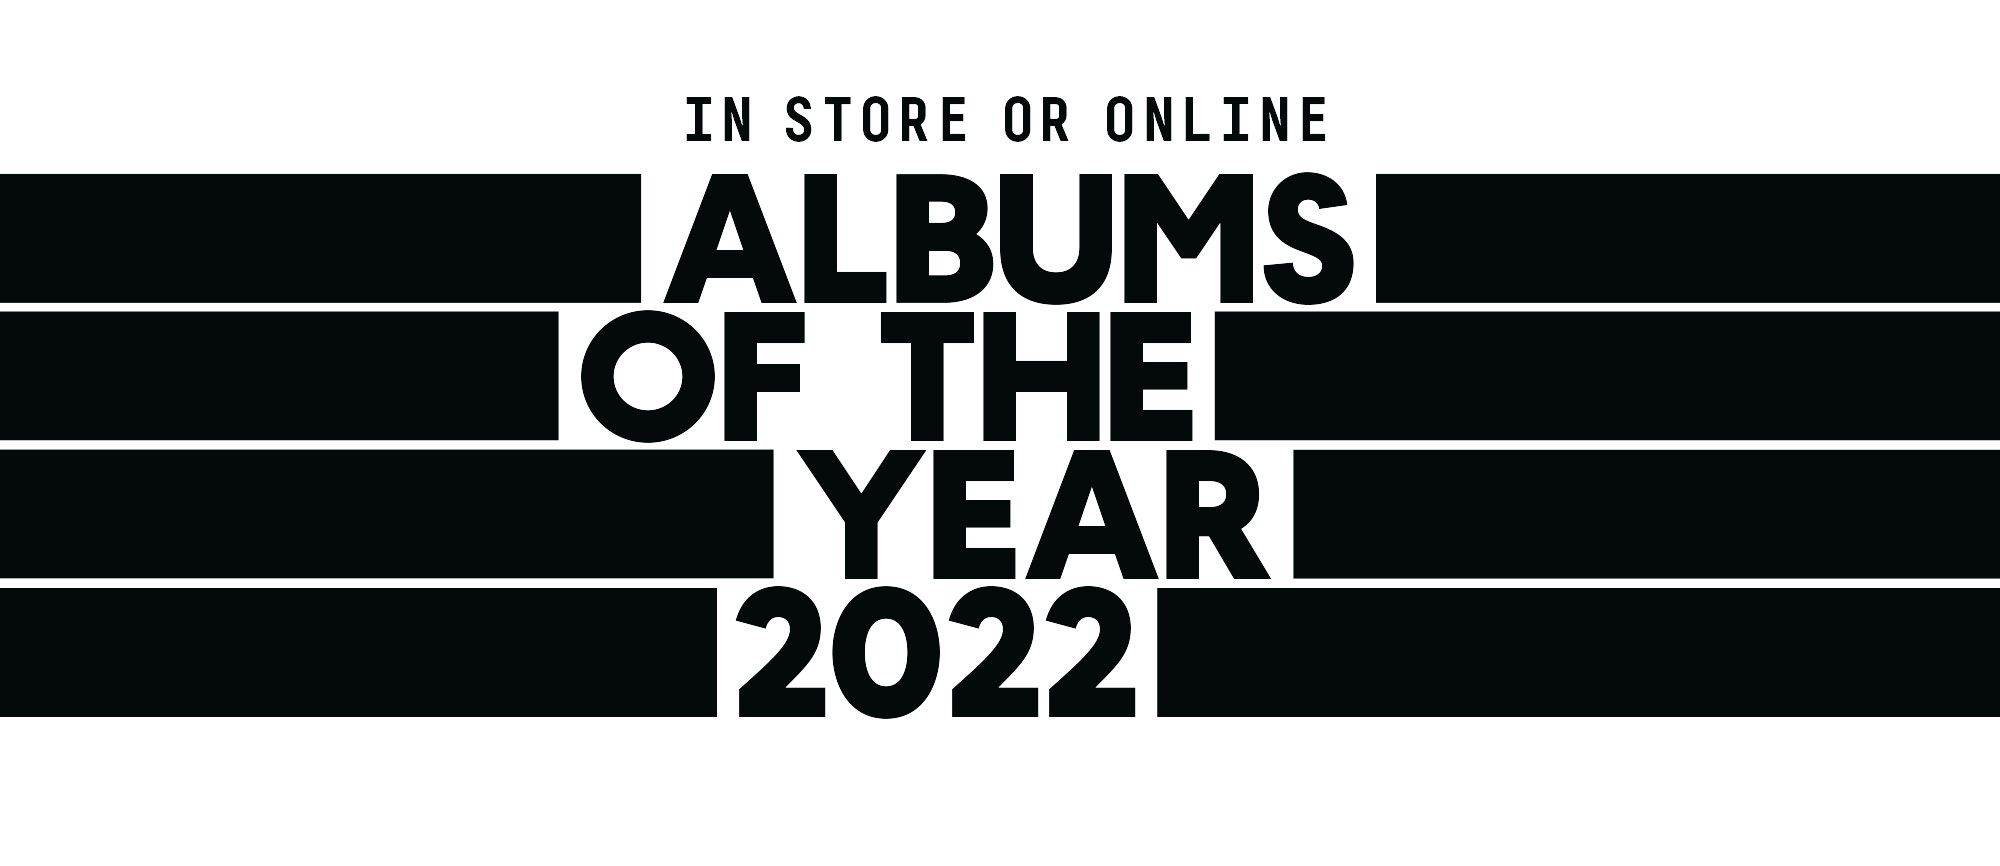 Albums of the Year 2022 | Rough Trade UK